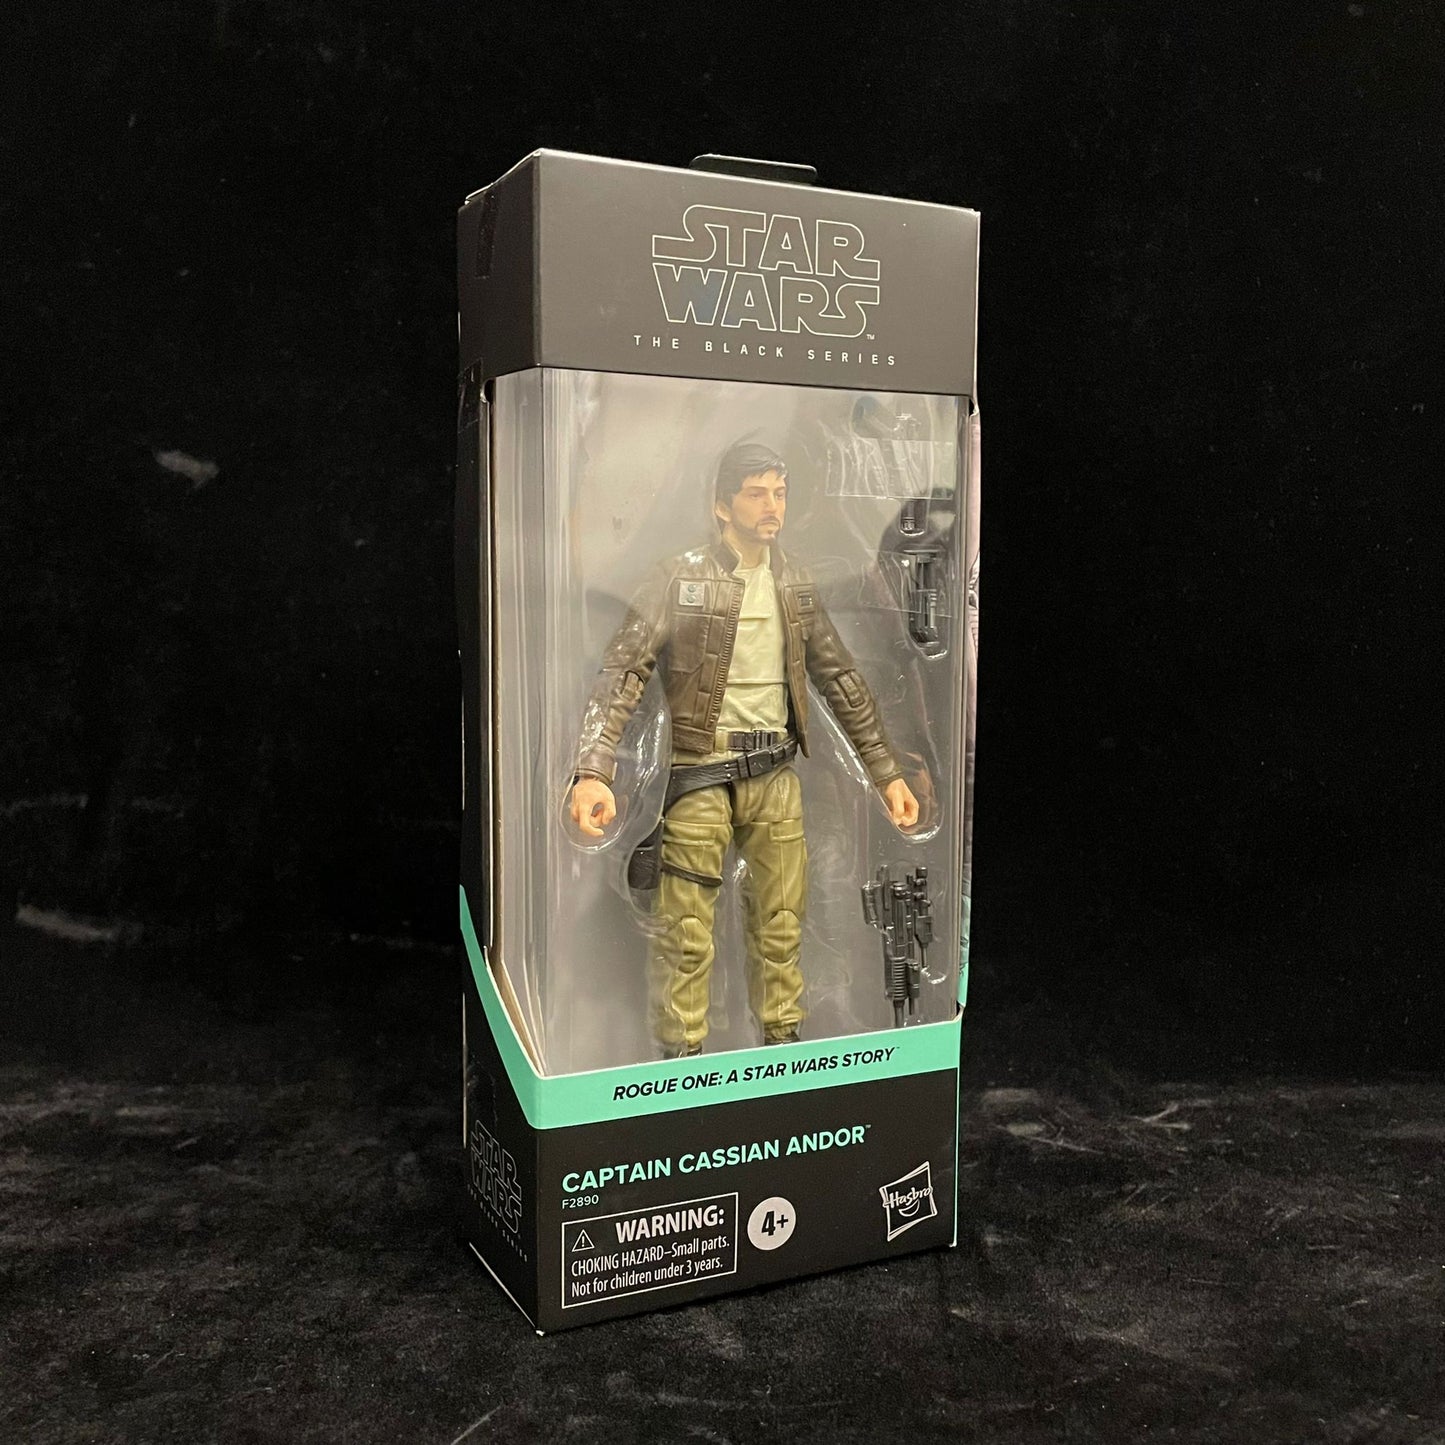 Star Wars The Black Series Captain Cassian Andor 6-Inch Action Figure